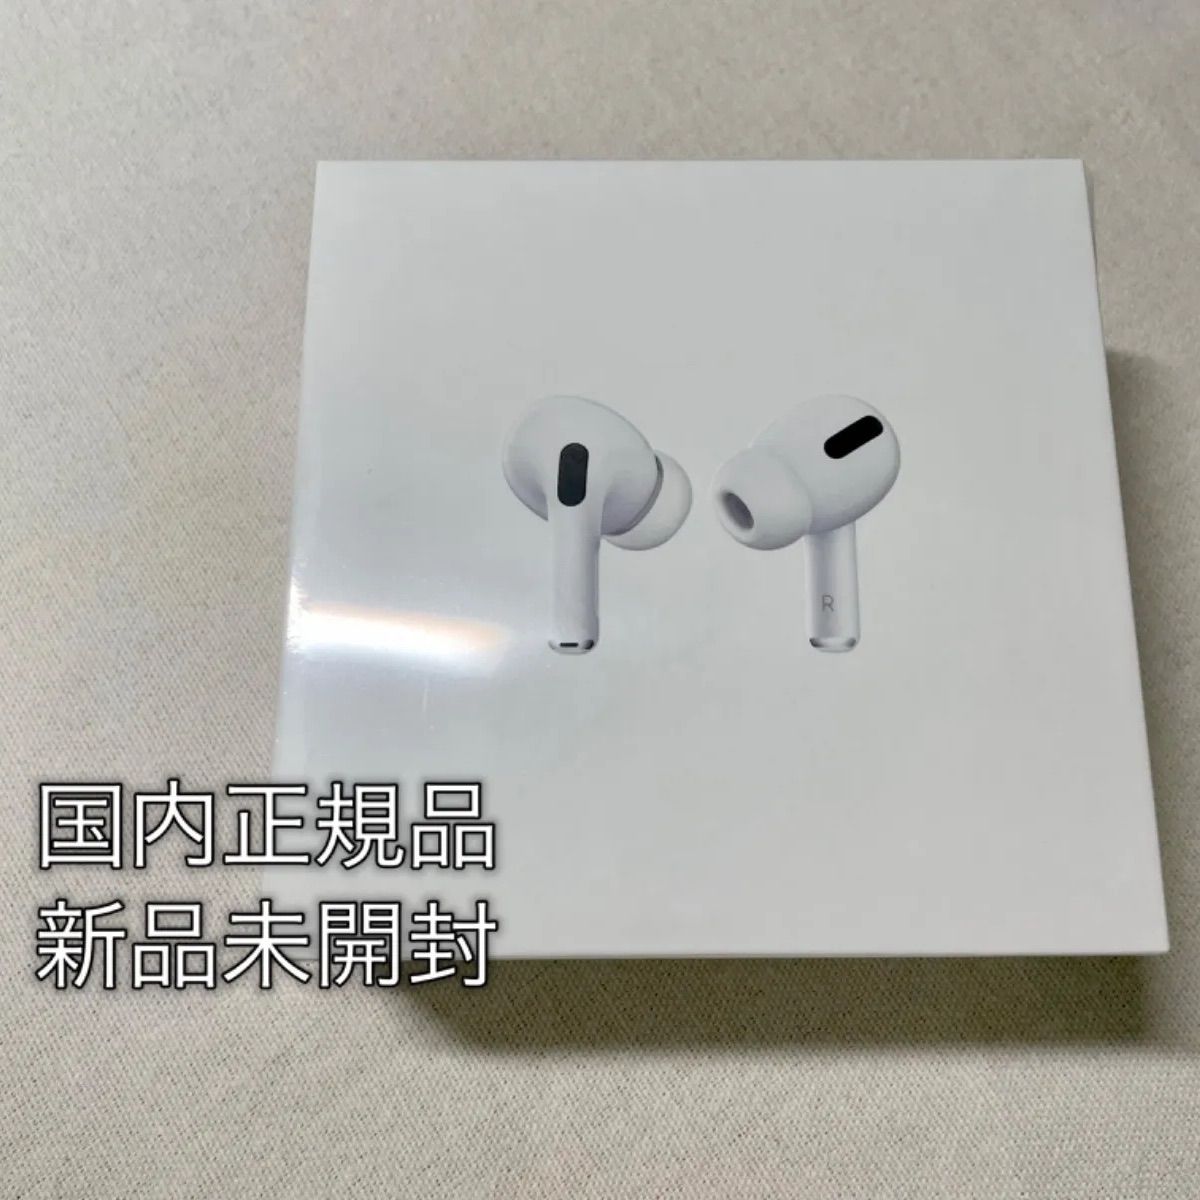 AirPods Pro 正規品 新品未開封 保証未開始airpods - ヘッドフォン